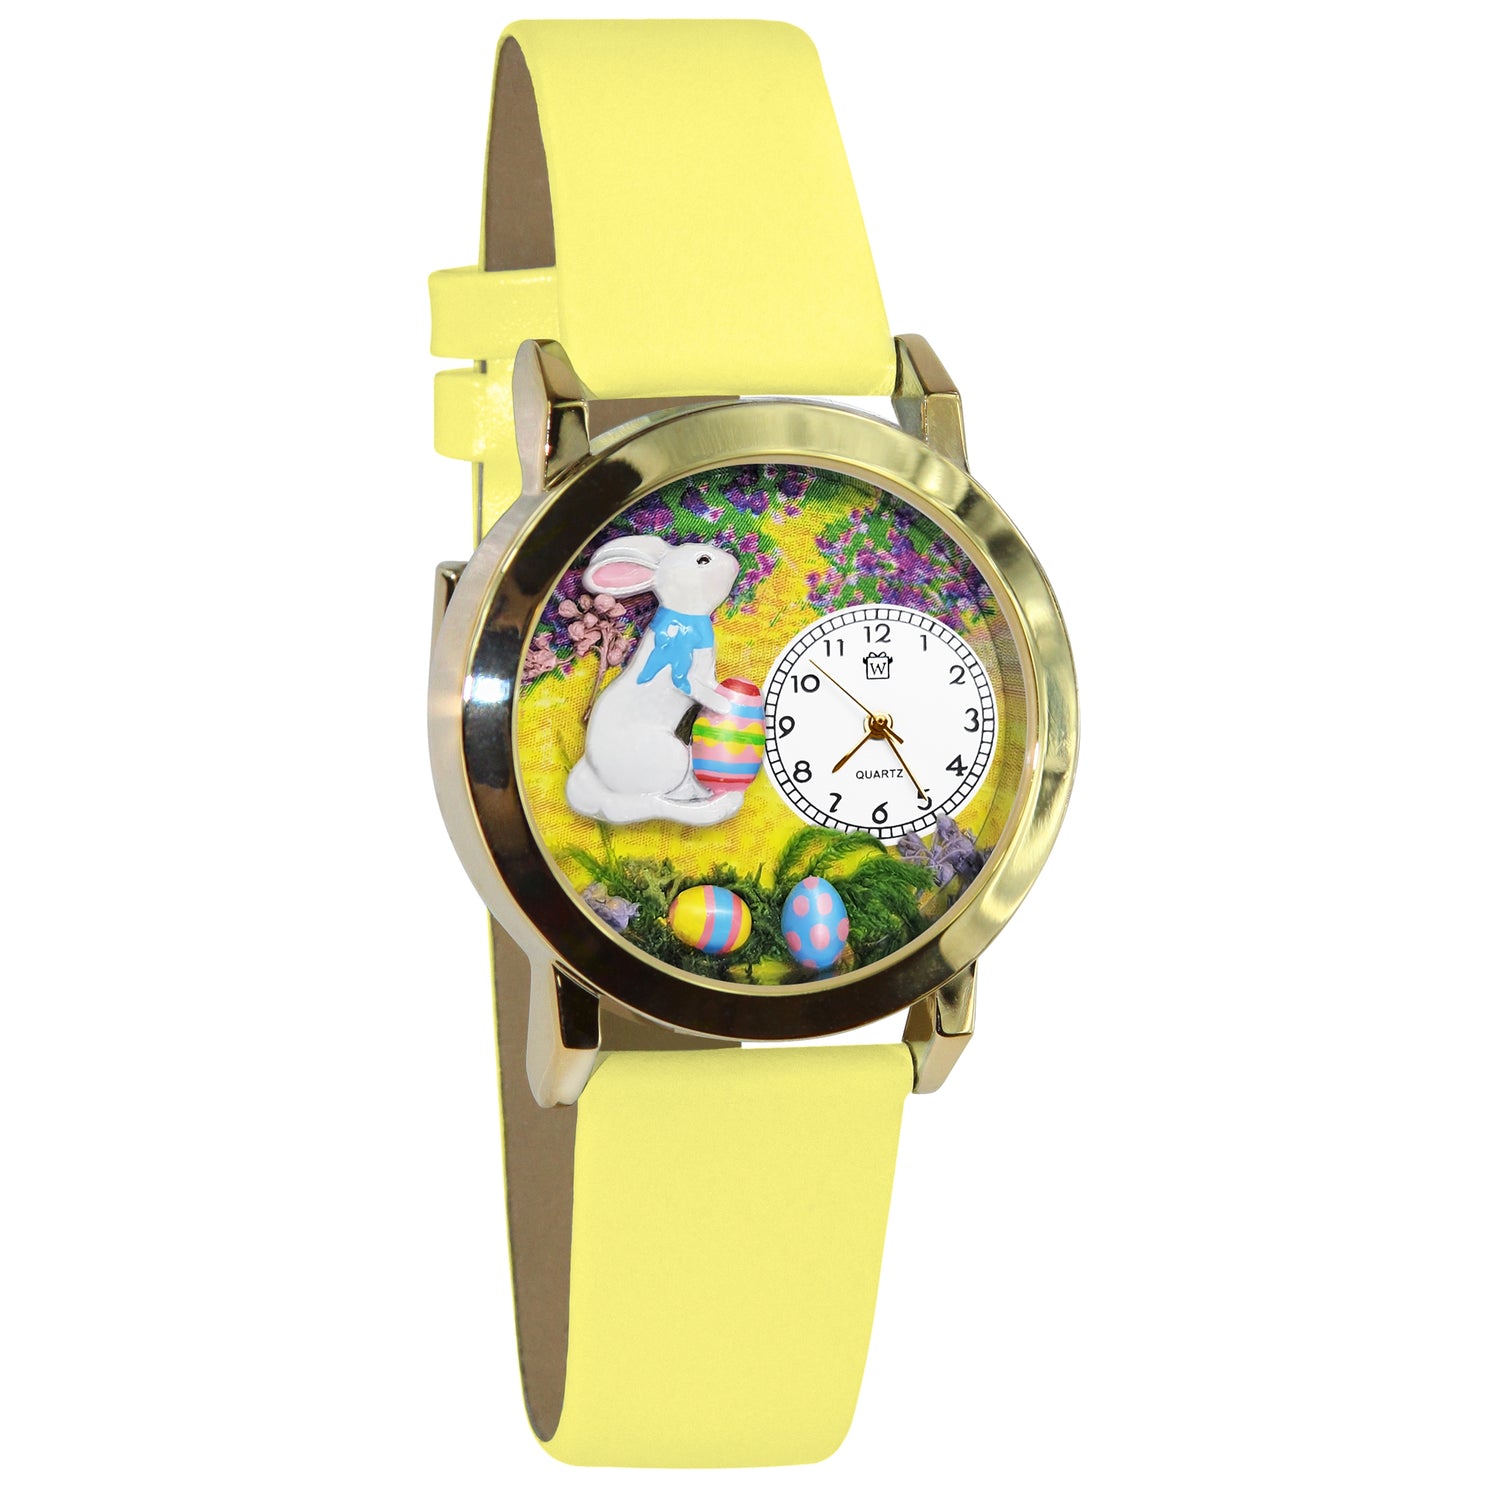 Whimsical Gifts | Easter Bunny 3D Watch Small Style | Handmade in USA | Holiday & Seasonal Themed | Easter | Novelty Unique Fun Miniatures Gift | Gold Finish Yellow Leather Watch Band